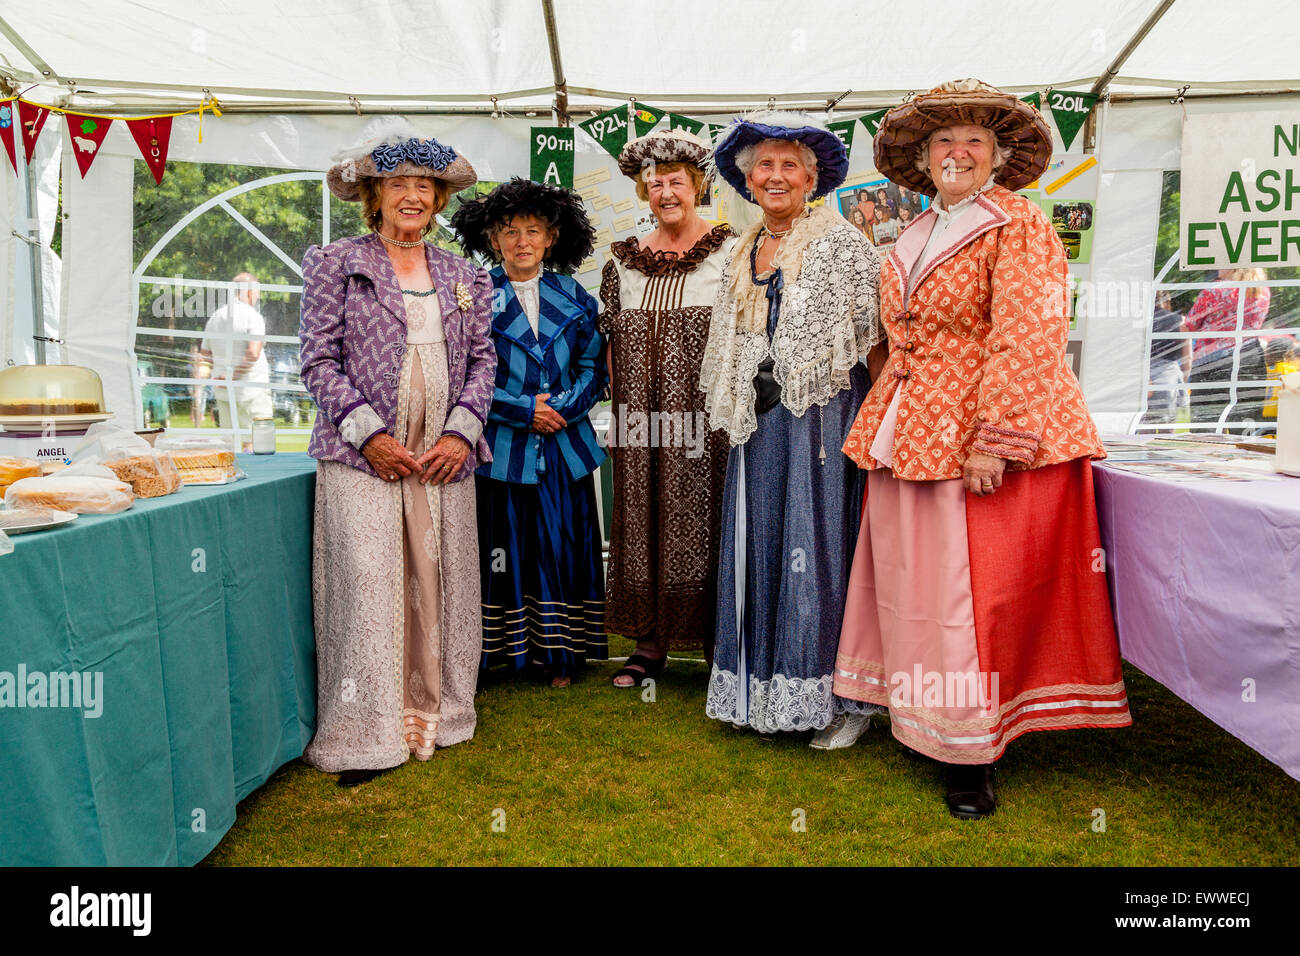 Members of The Women's Institute Dressed In Period Clothing, Nutley Village Fete, Nutley, Sussex, UK Stock Photo